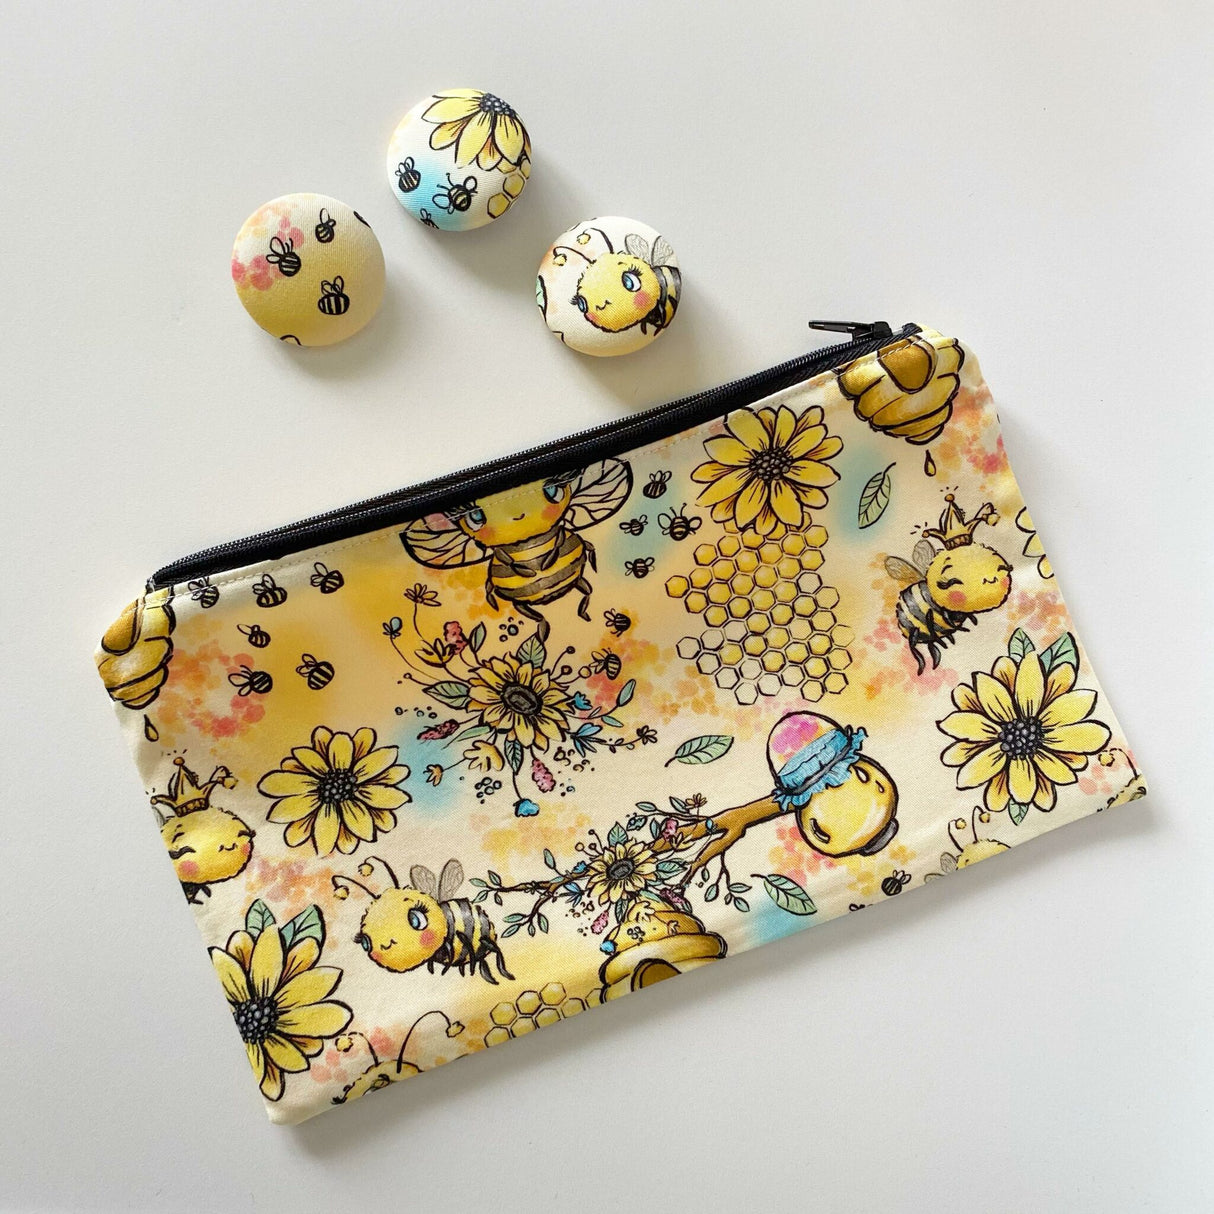 Honey Bee Pencil Case and Bee Button Badge